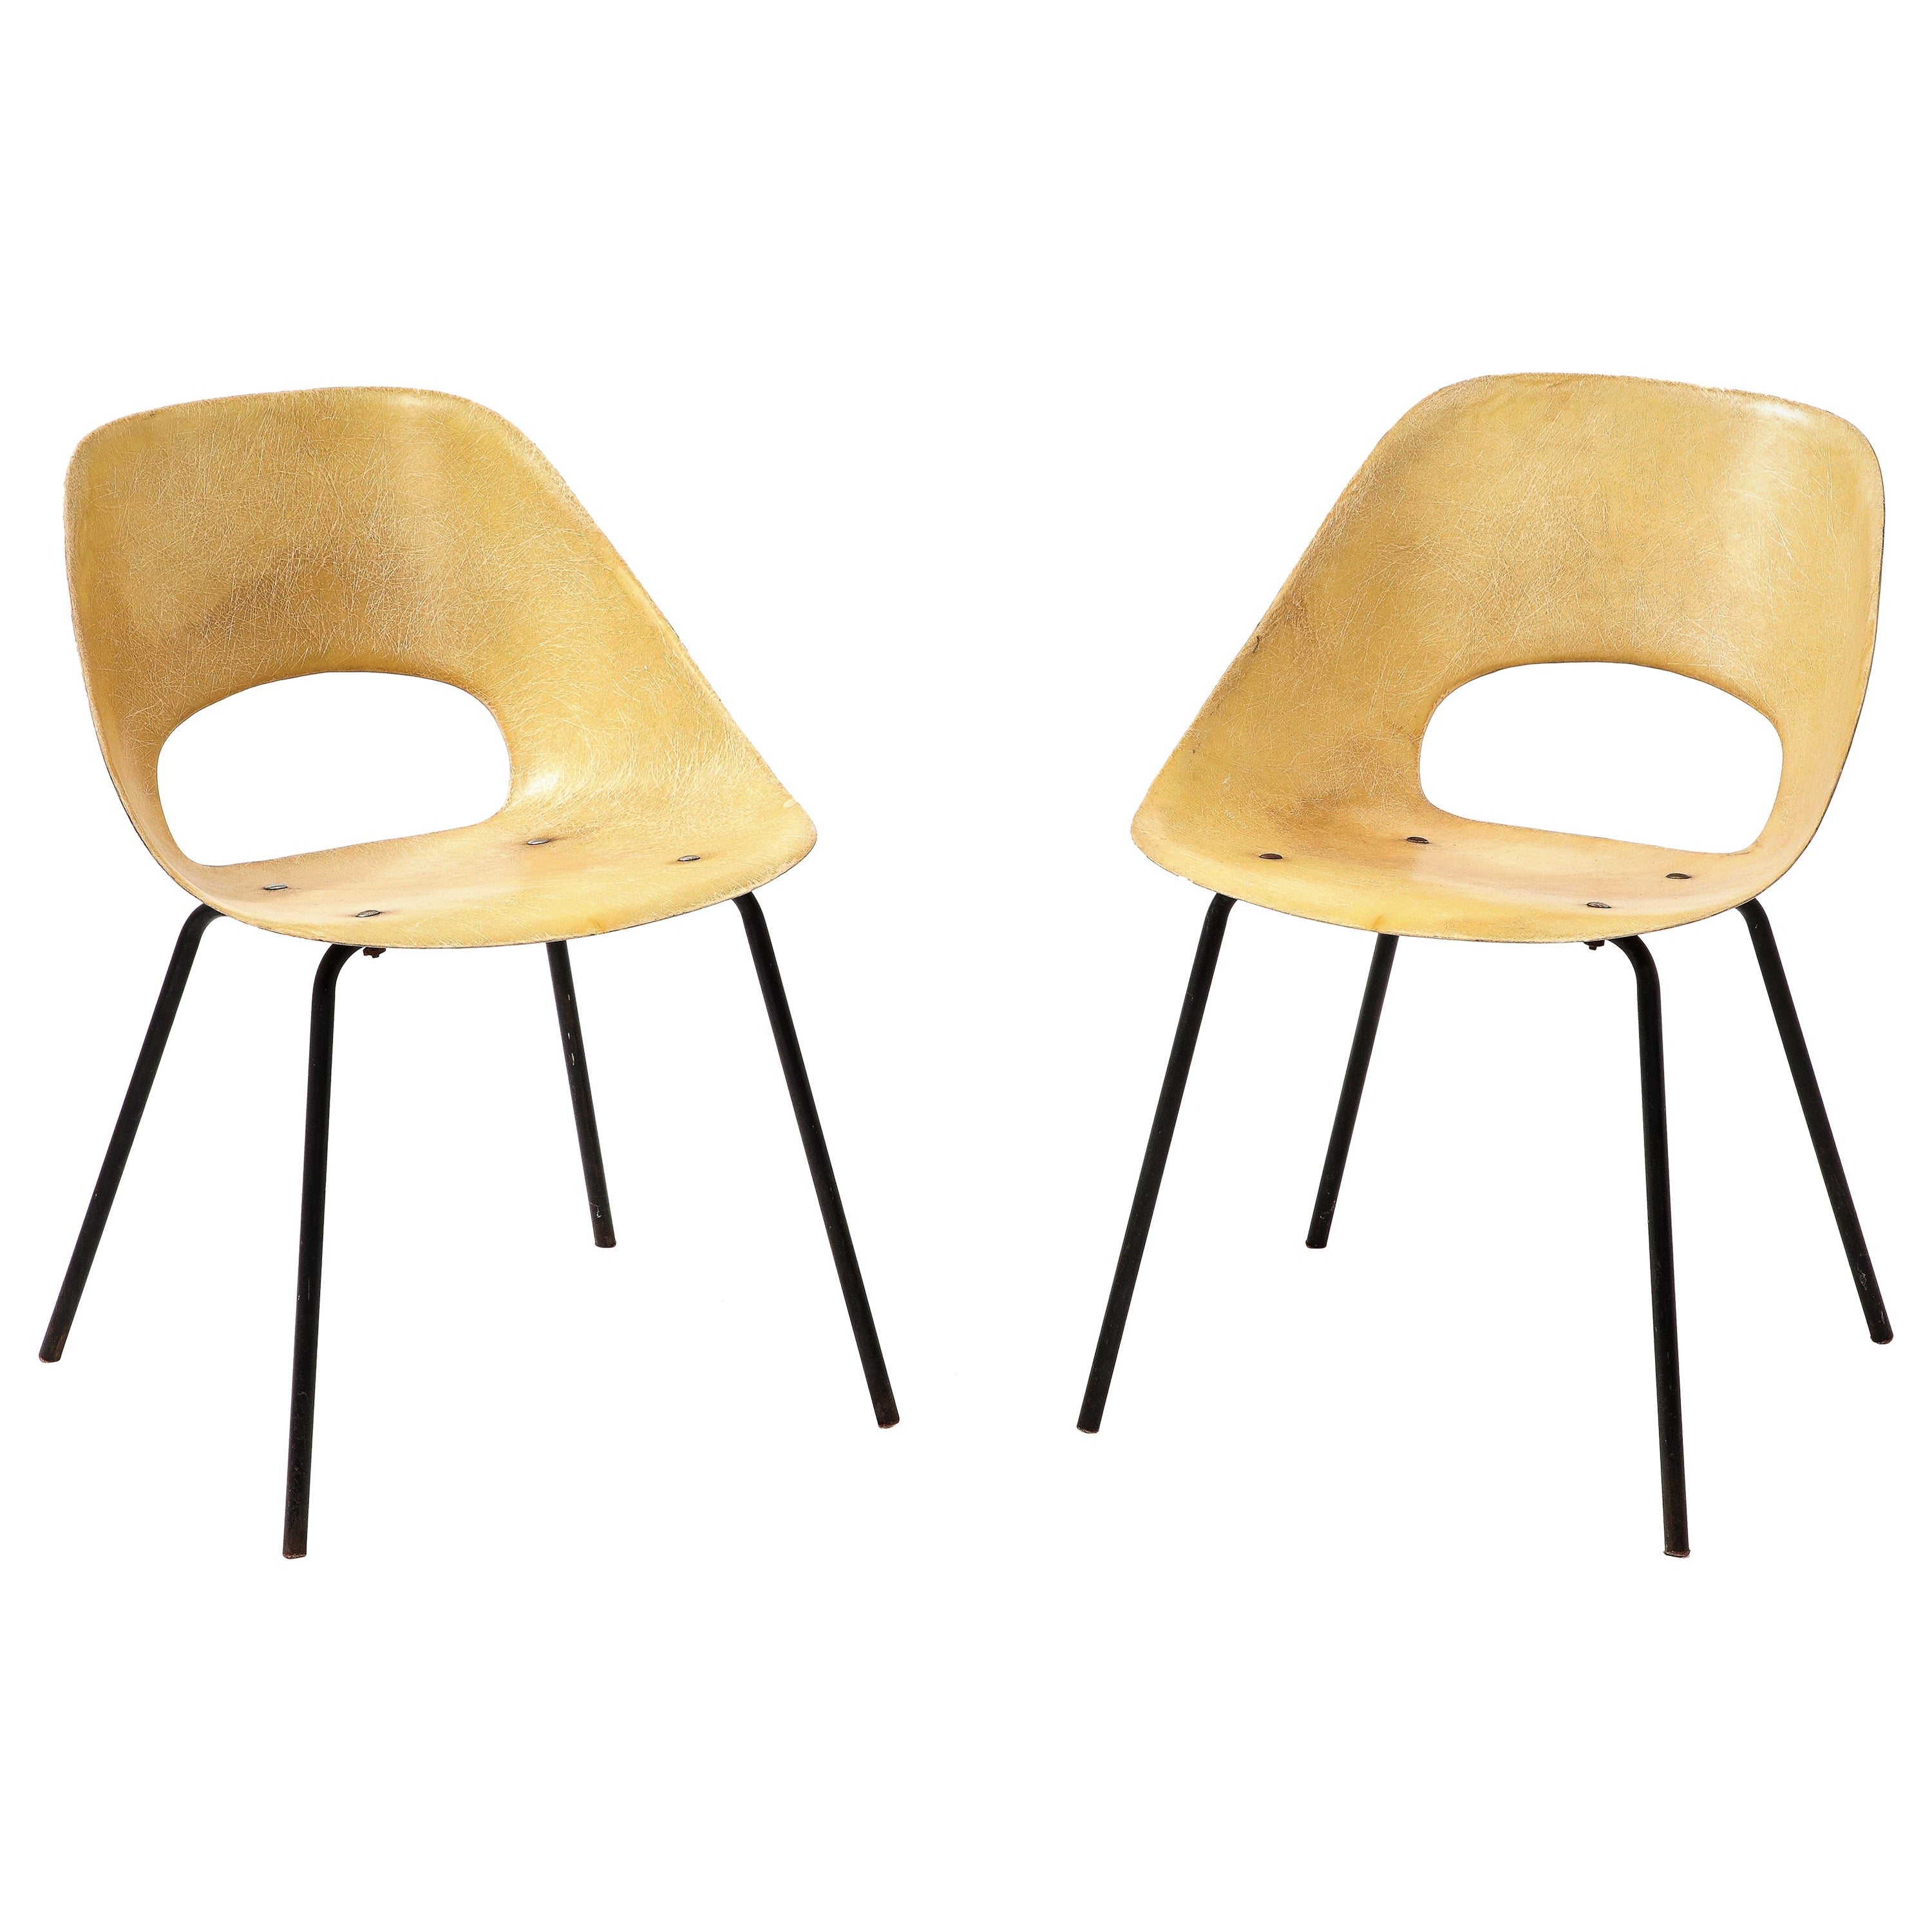 Pair of Pierre Guariche Yellow Fiberglass Side Chairs by Steiner - France 1950's